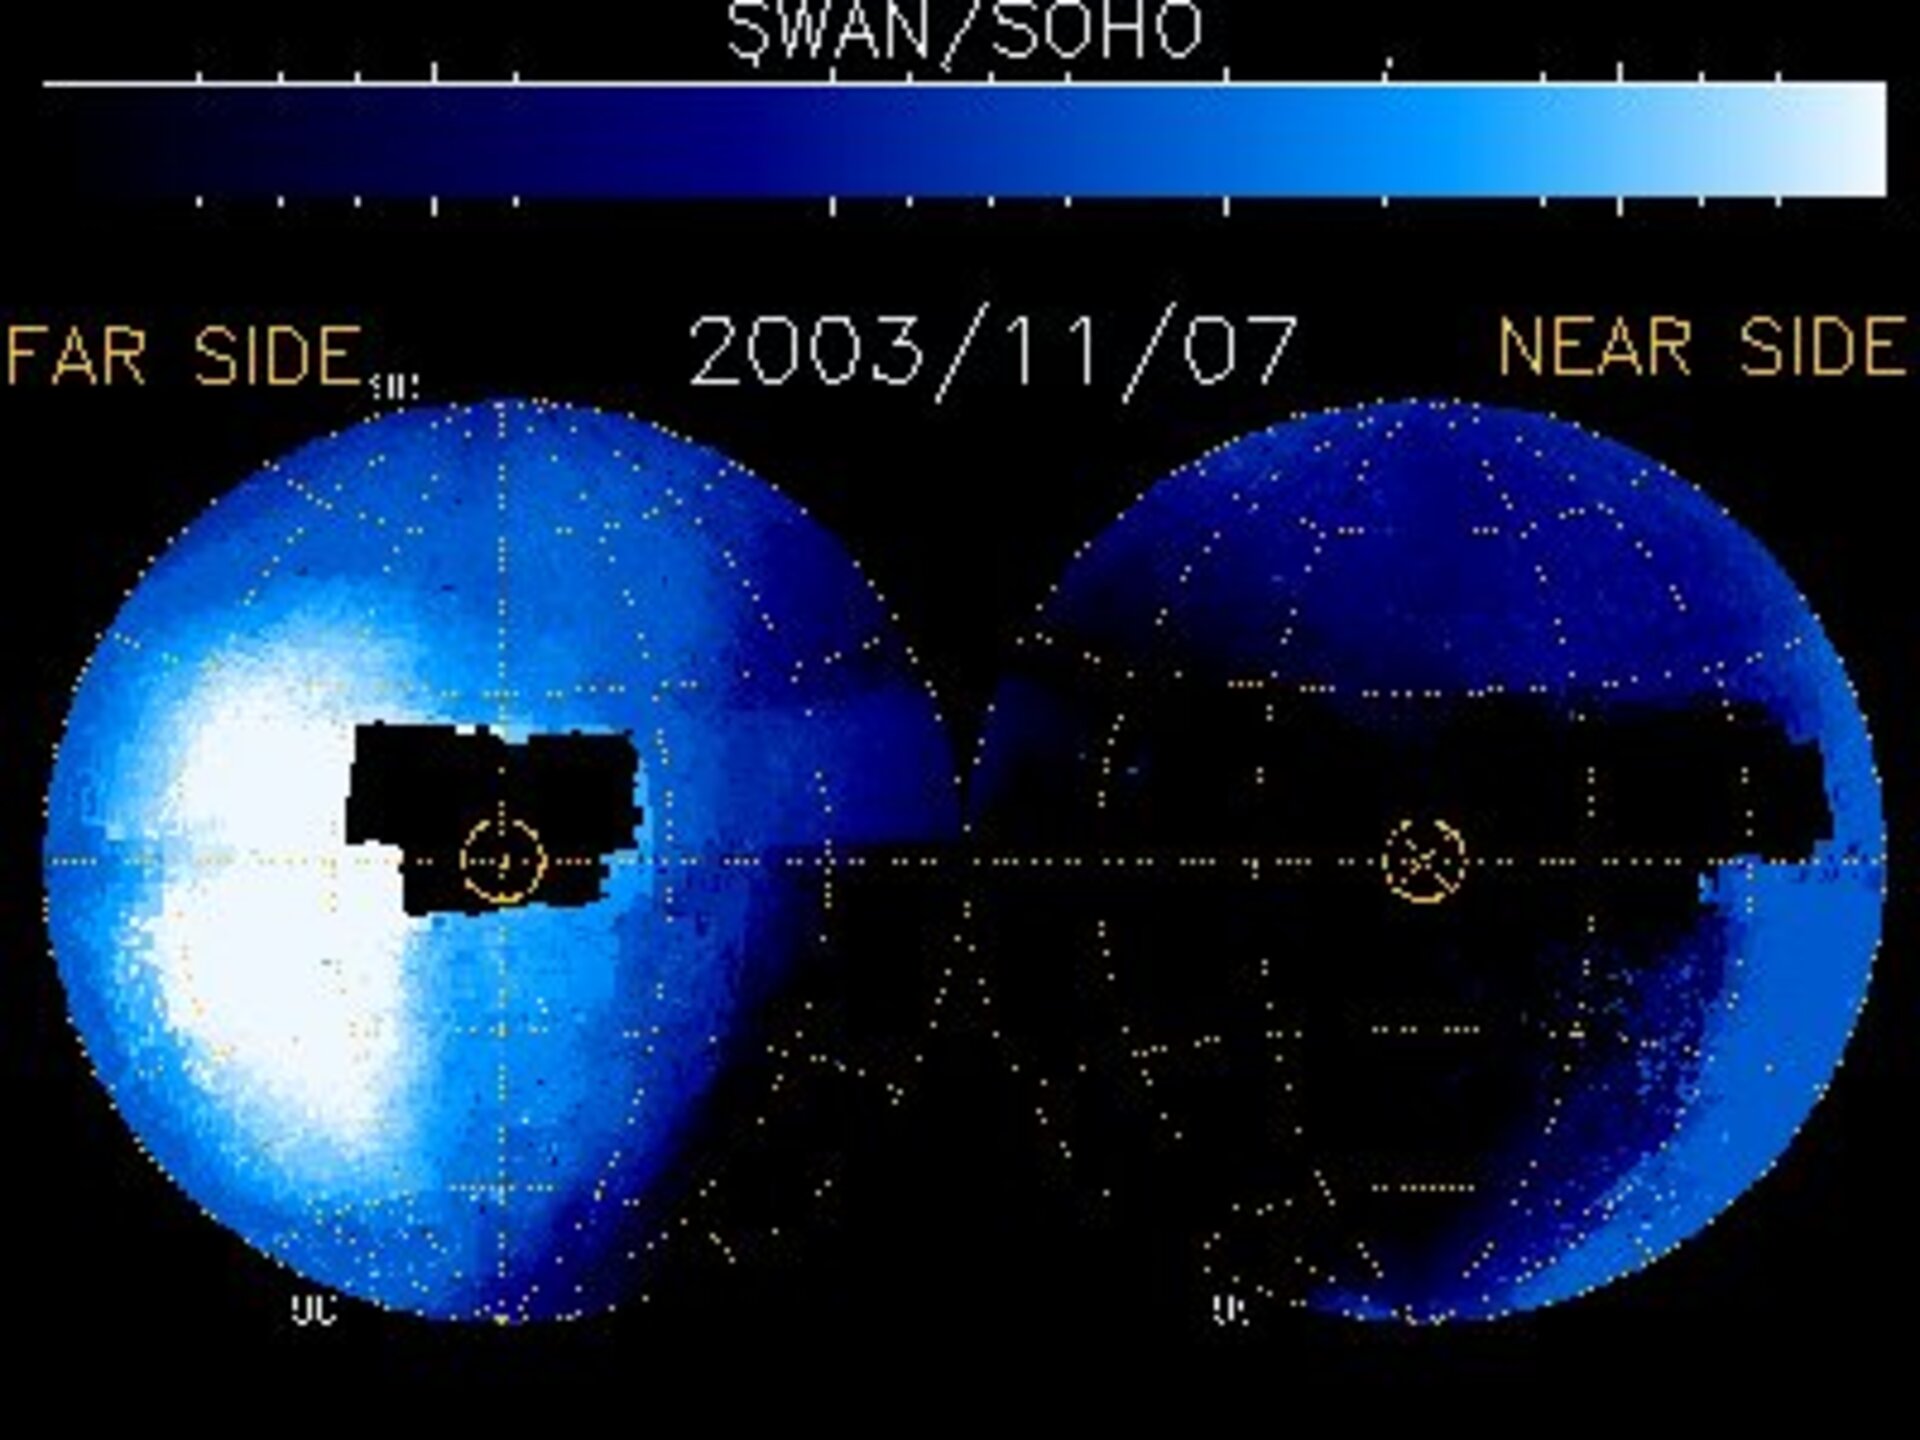 Views of Sun's far side from SOHO's SWAN instrument